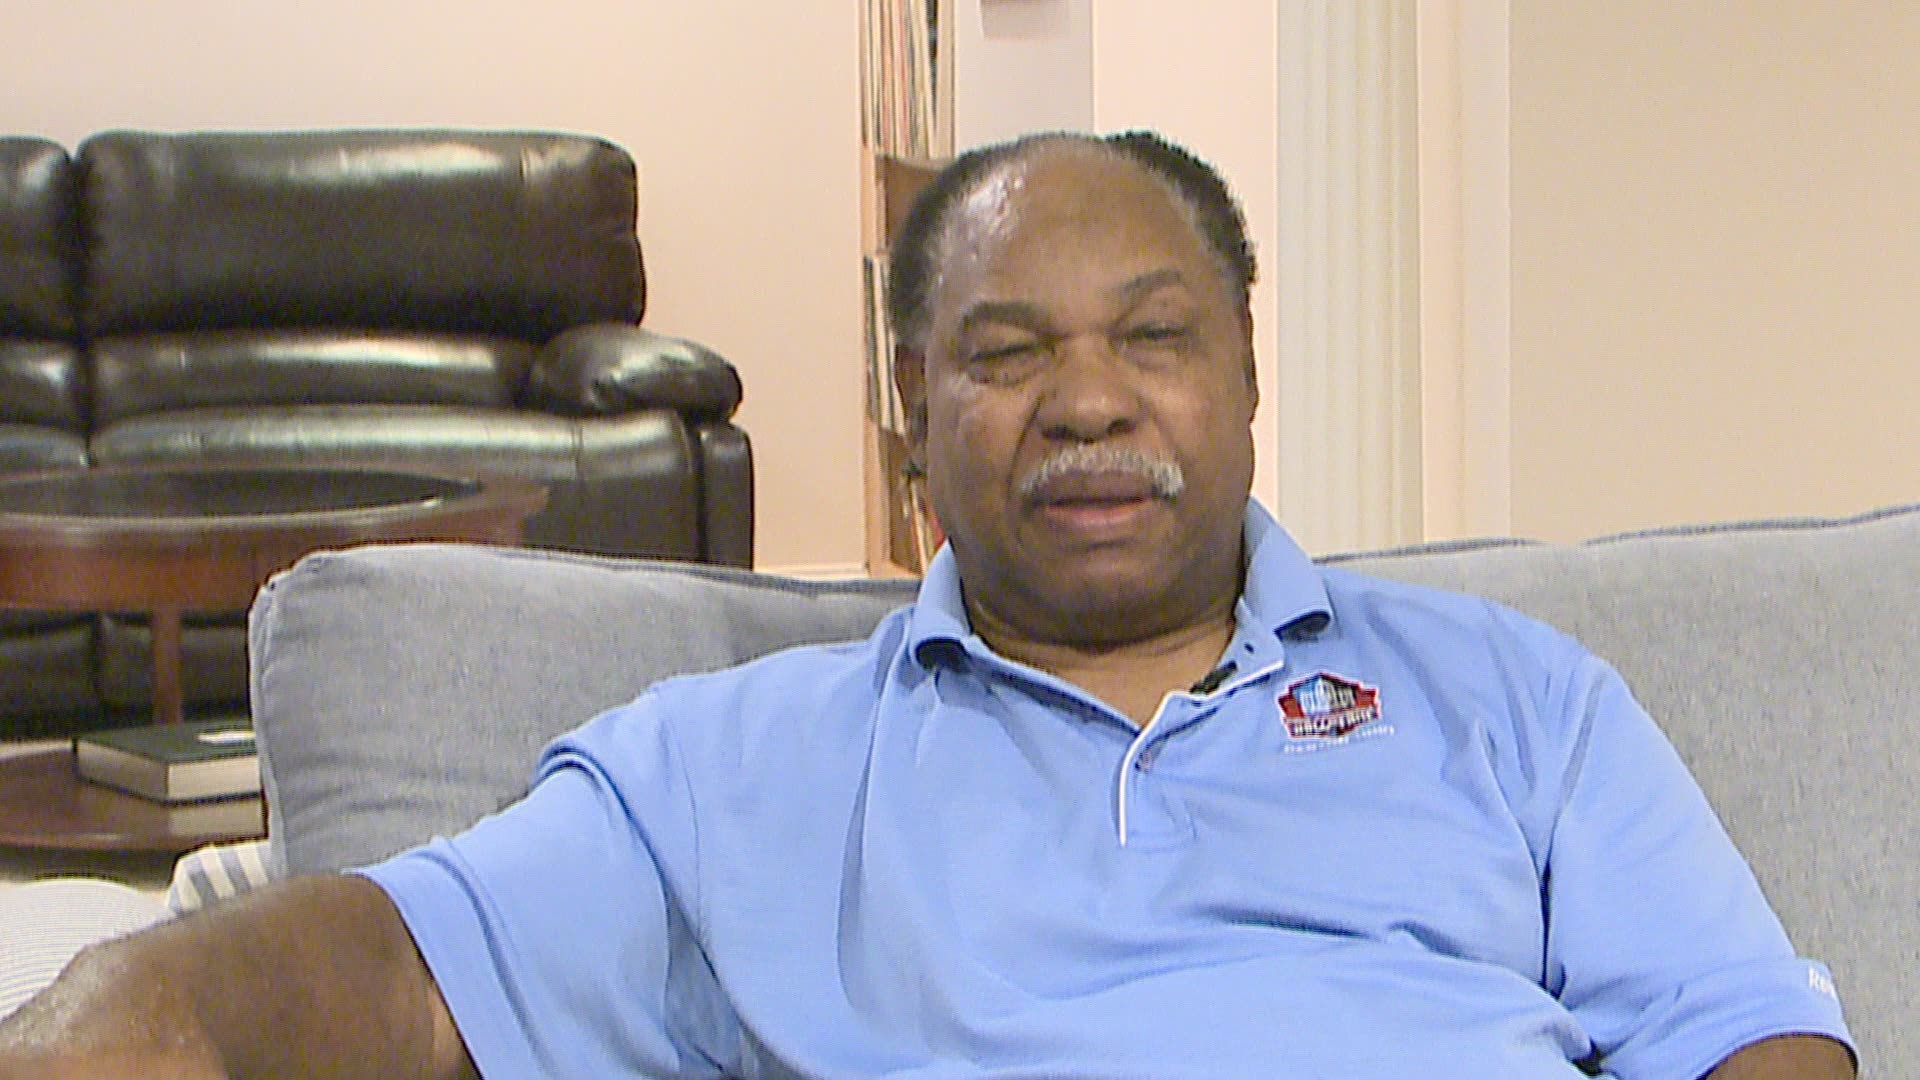 Redskins legend Bobby Mitchell passed away on Sunday. WUSA9's Bruce Johnson spoke with the Hall of Famer back in 2011.